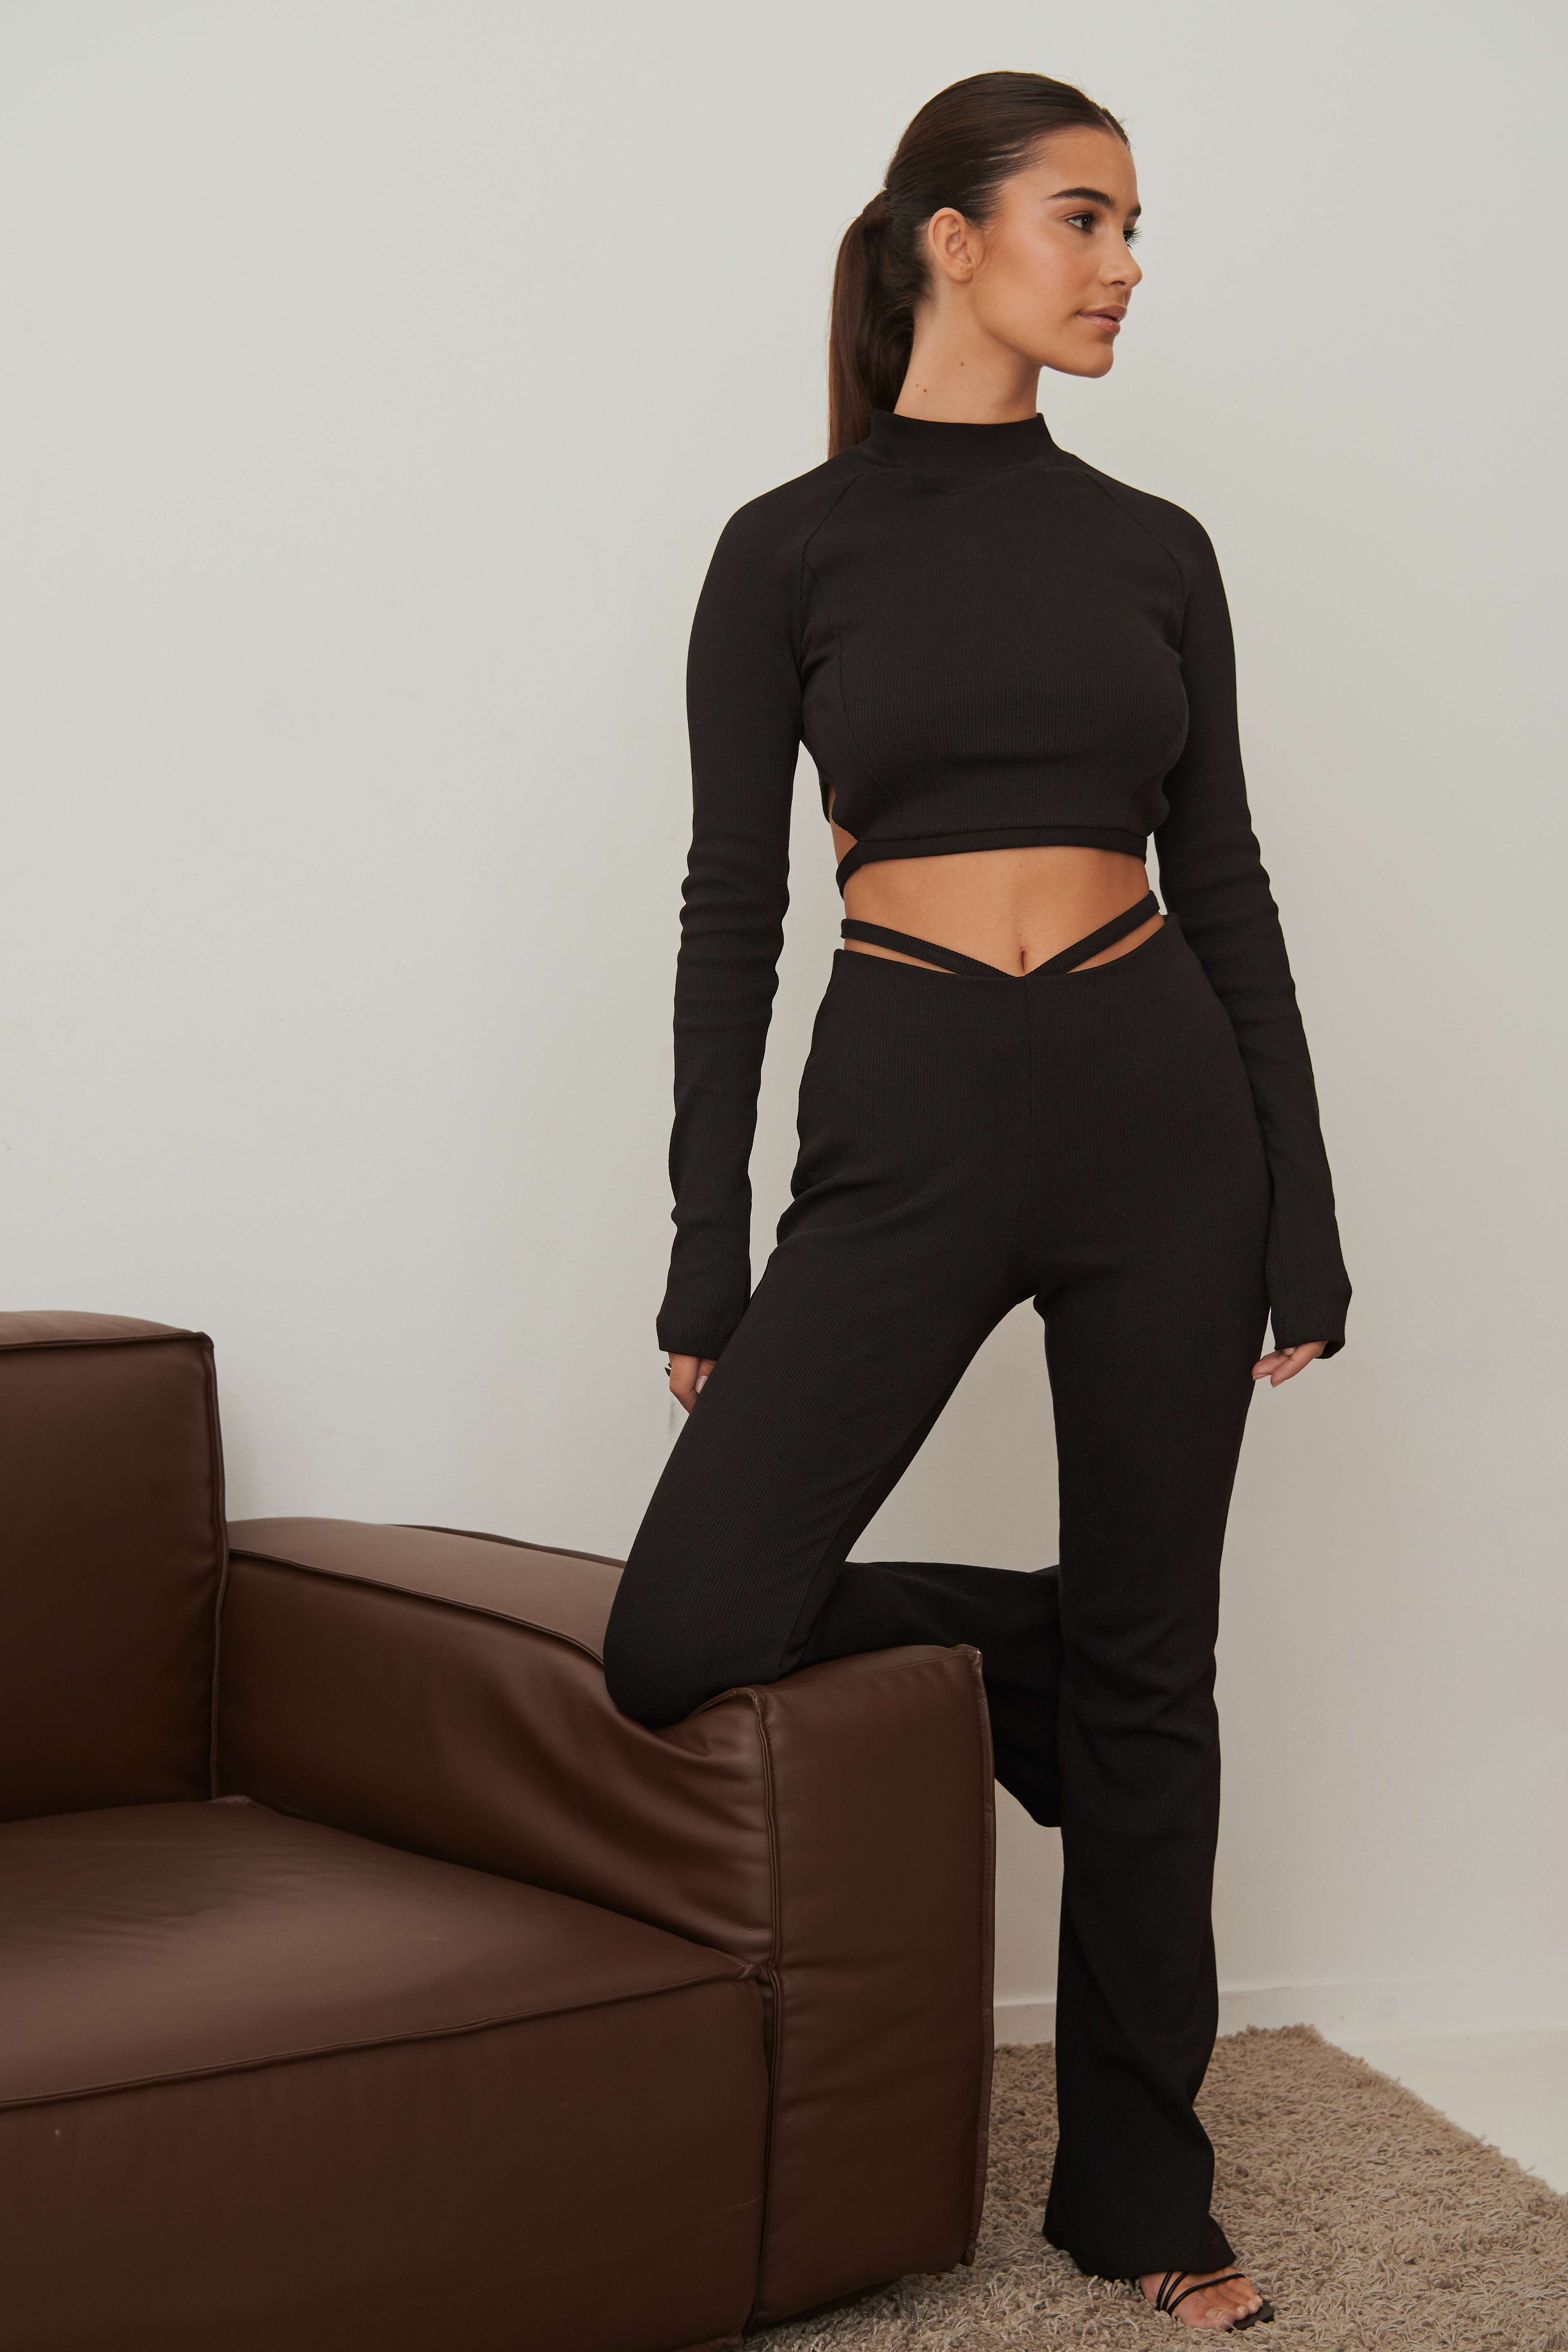 Waist Detail Jersey Pants Outfit.